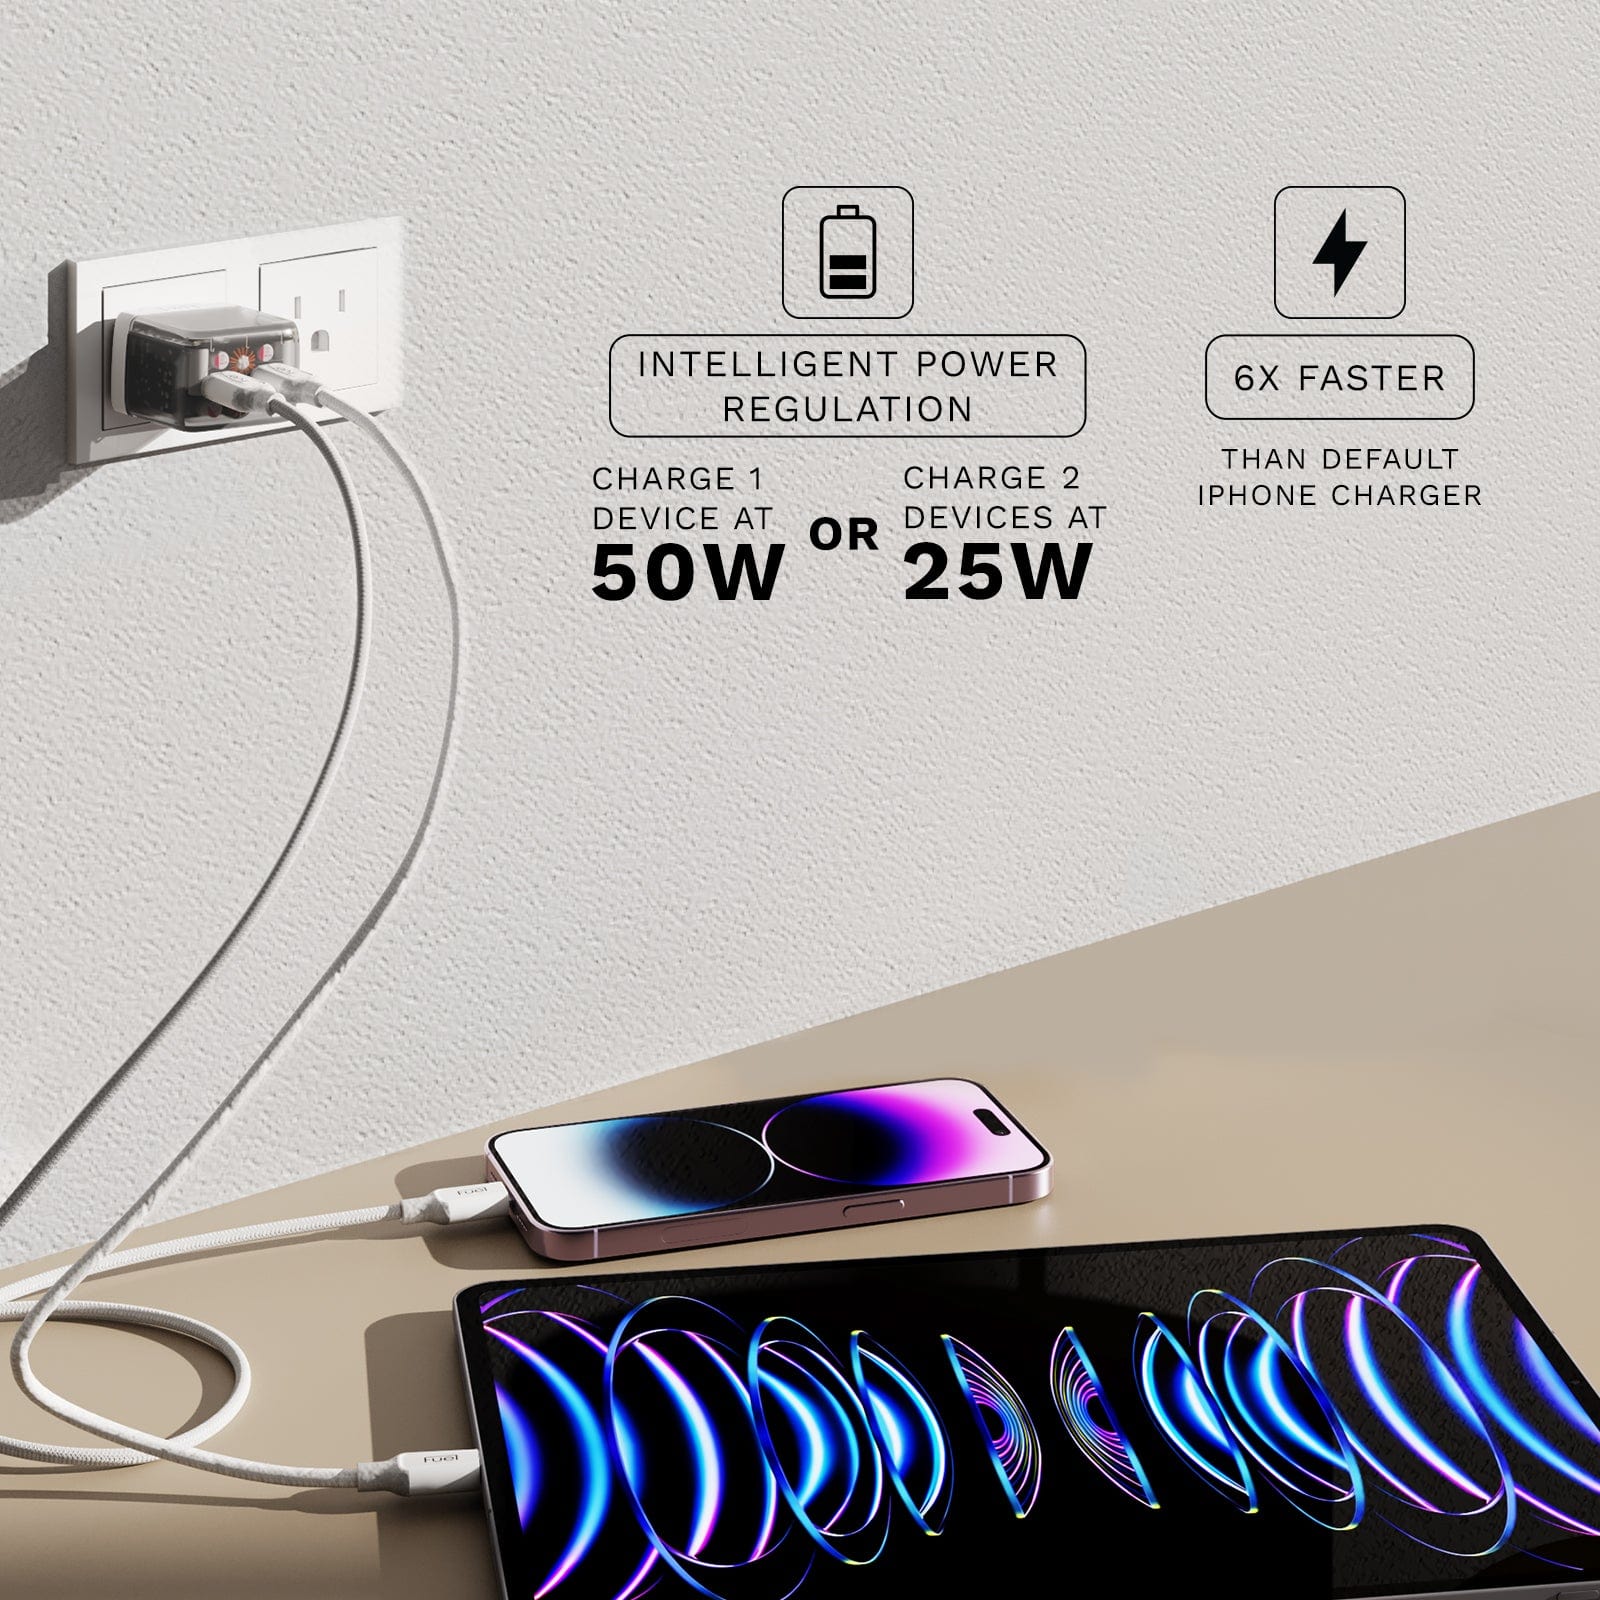 INTELLIGENT POWER REGULATION. CHARGE 1 DEVICE AT 50W OR CHARGE TWO DEVICES AT 25W. 6X FASTER THAN DEFAULT IPHONE CHARGER